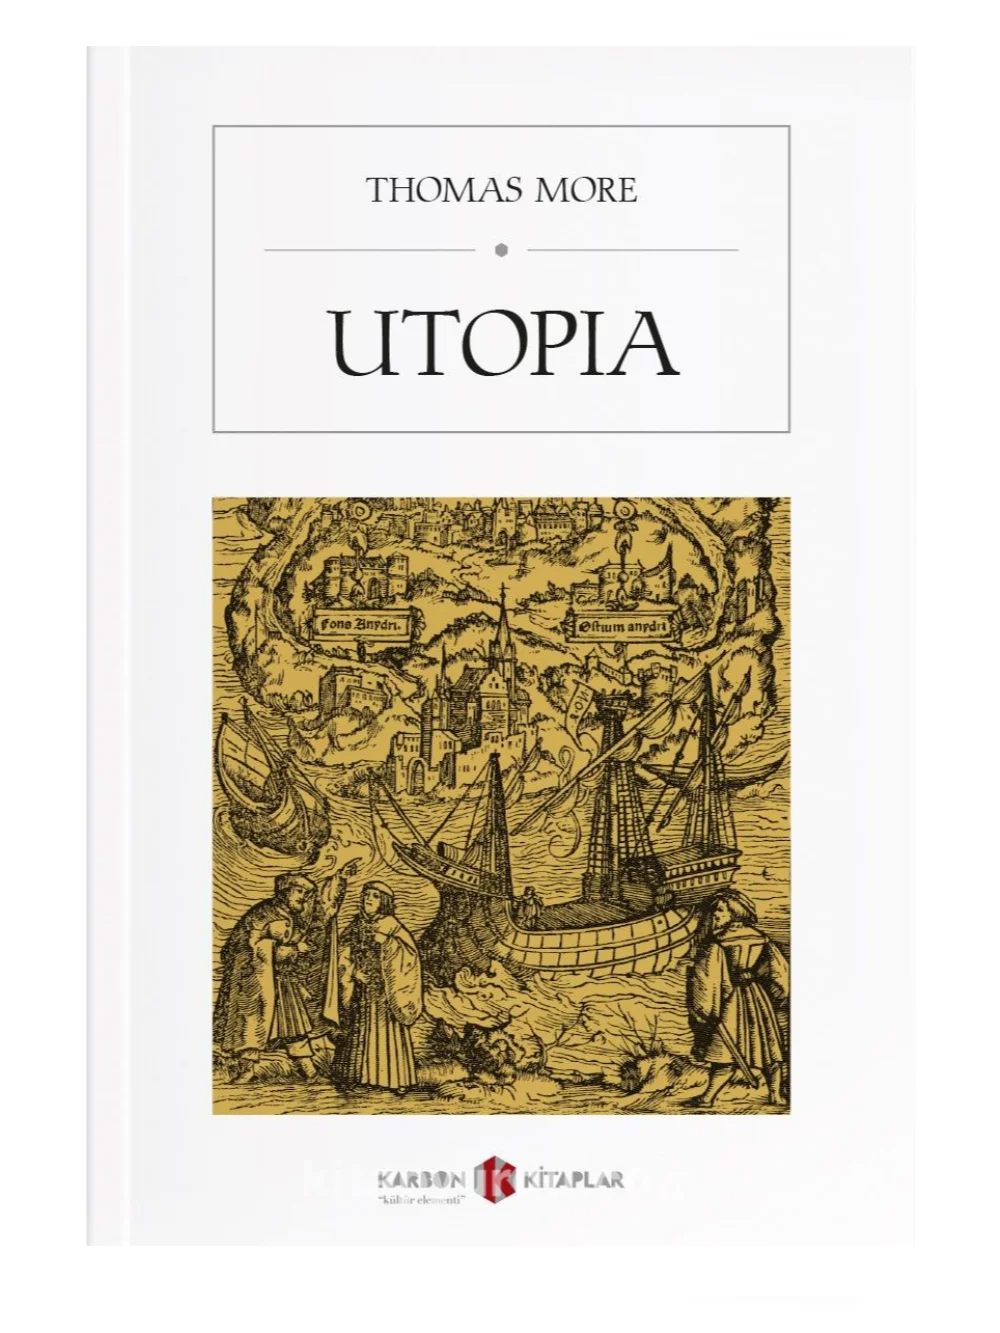 

Utopia - Thomas More - World Literature Classics - English Book - 122 pages - Nice gift for friends and English Learners